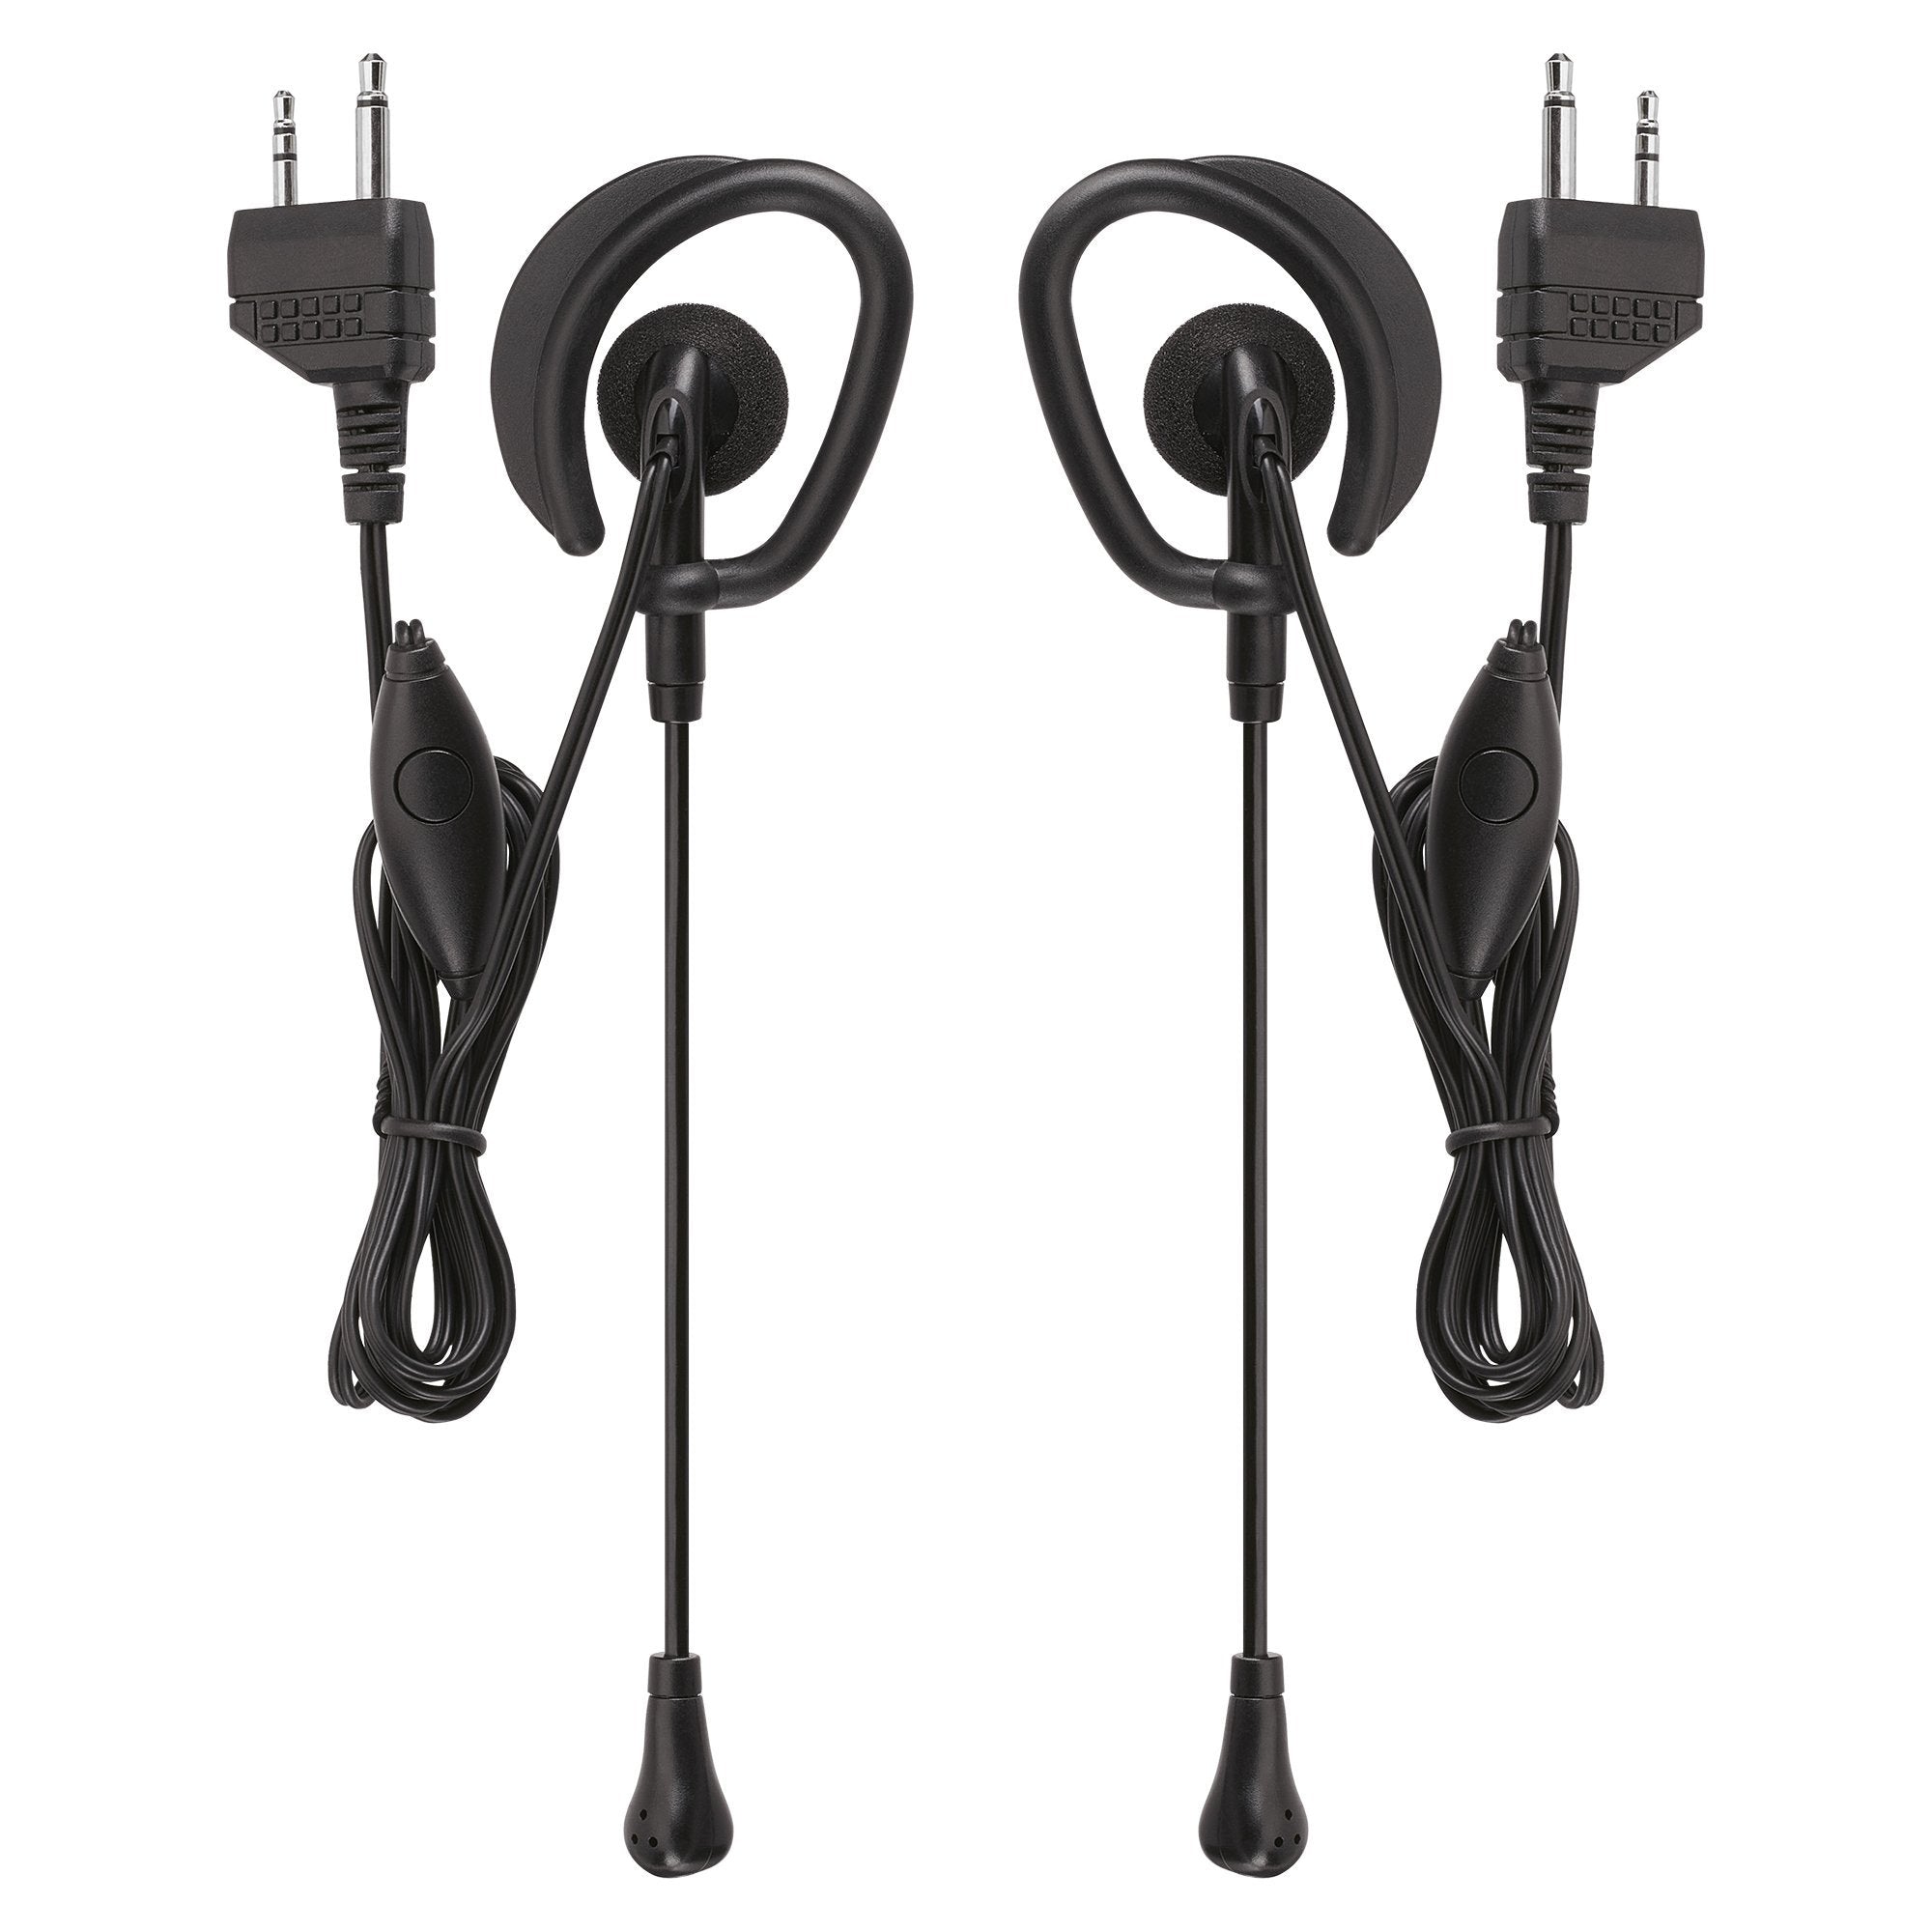 Midland Headsets For Lxt and Gxt Models